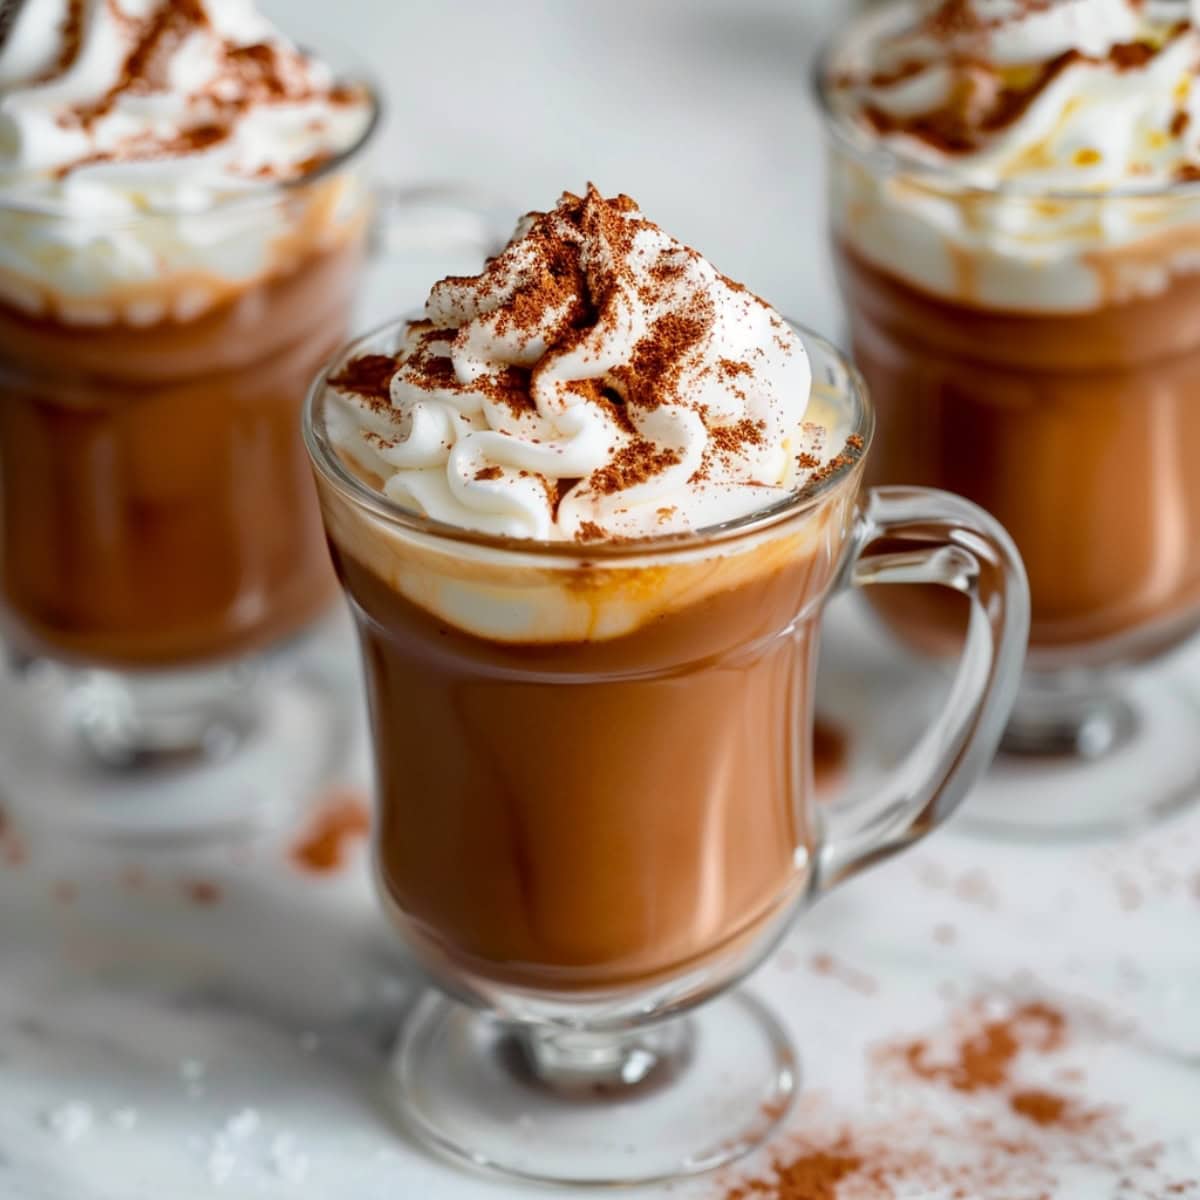 Rich and creamy hot cocoa blended with Kahlua liqueur, perfect for chilly nights